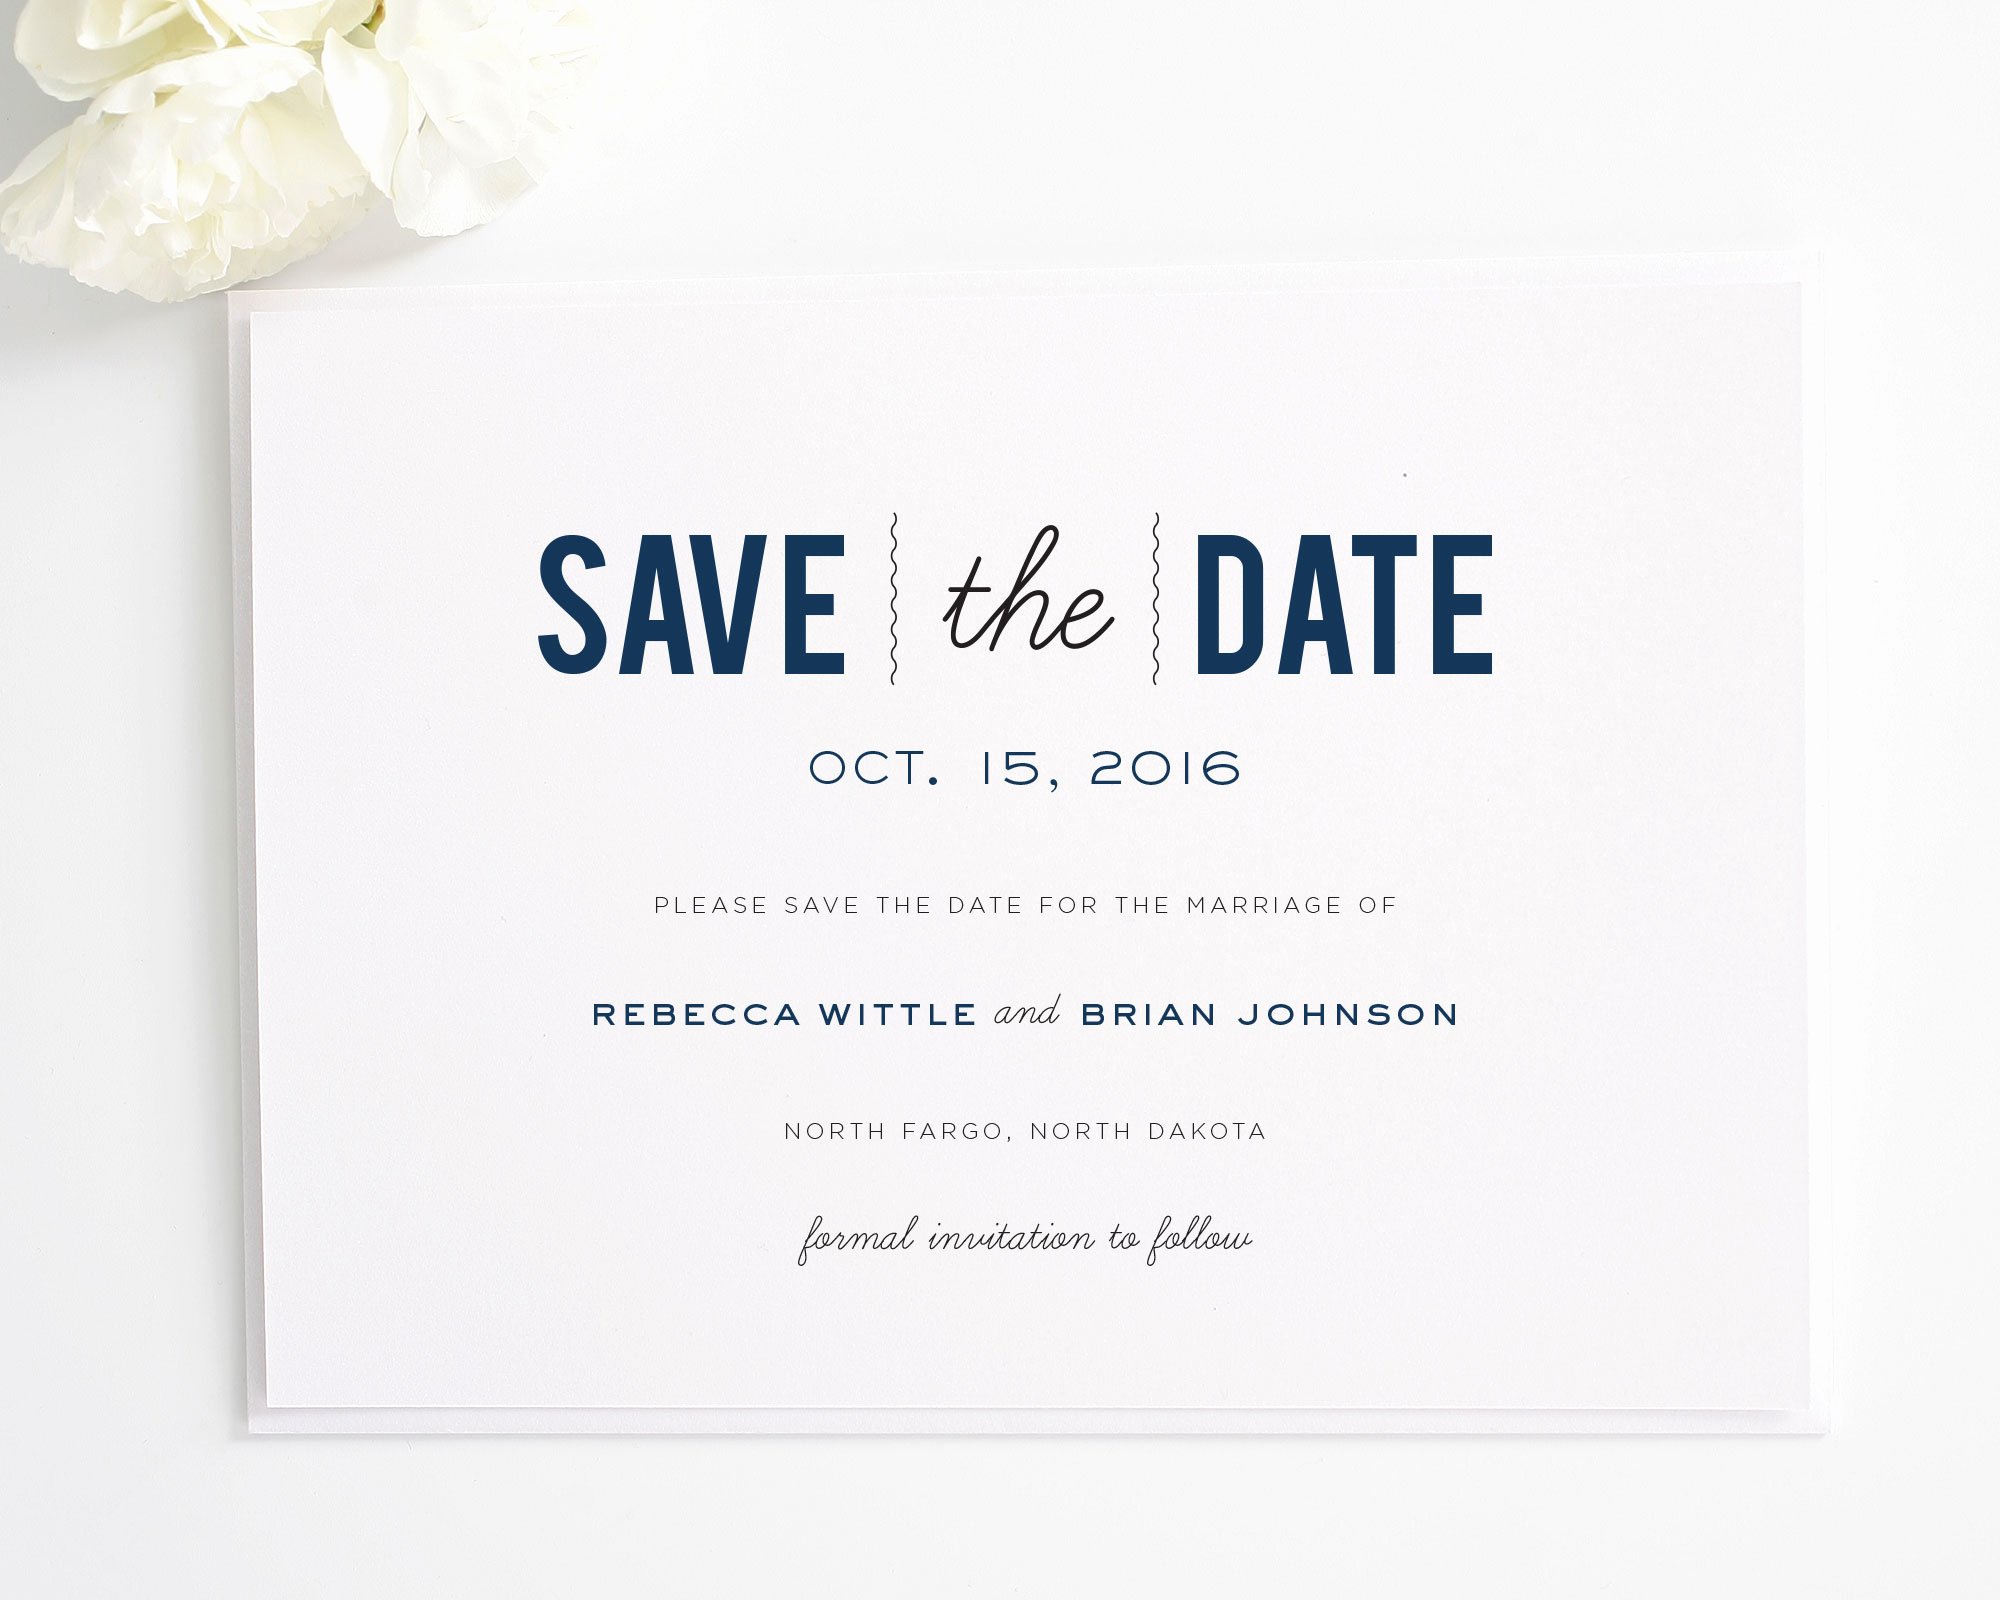 Save the Date Wedding Invitations Save the Date Wedding